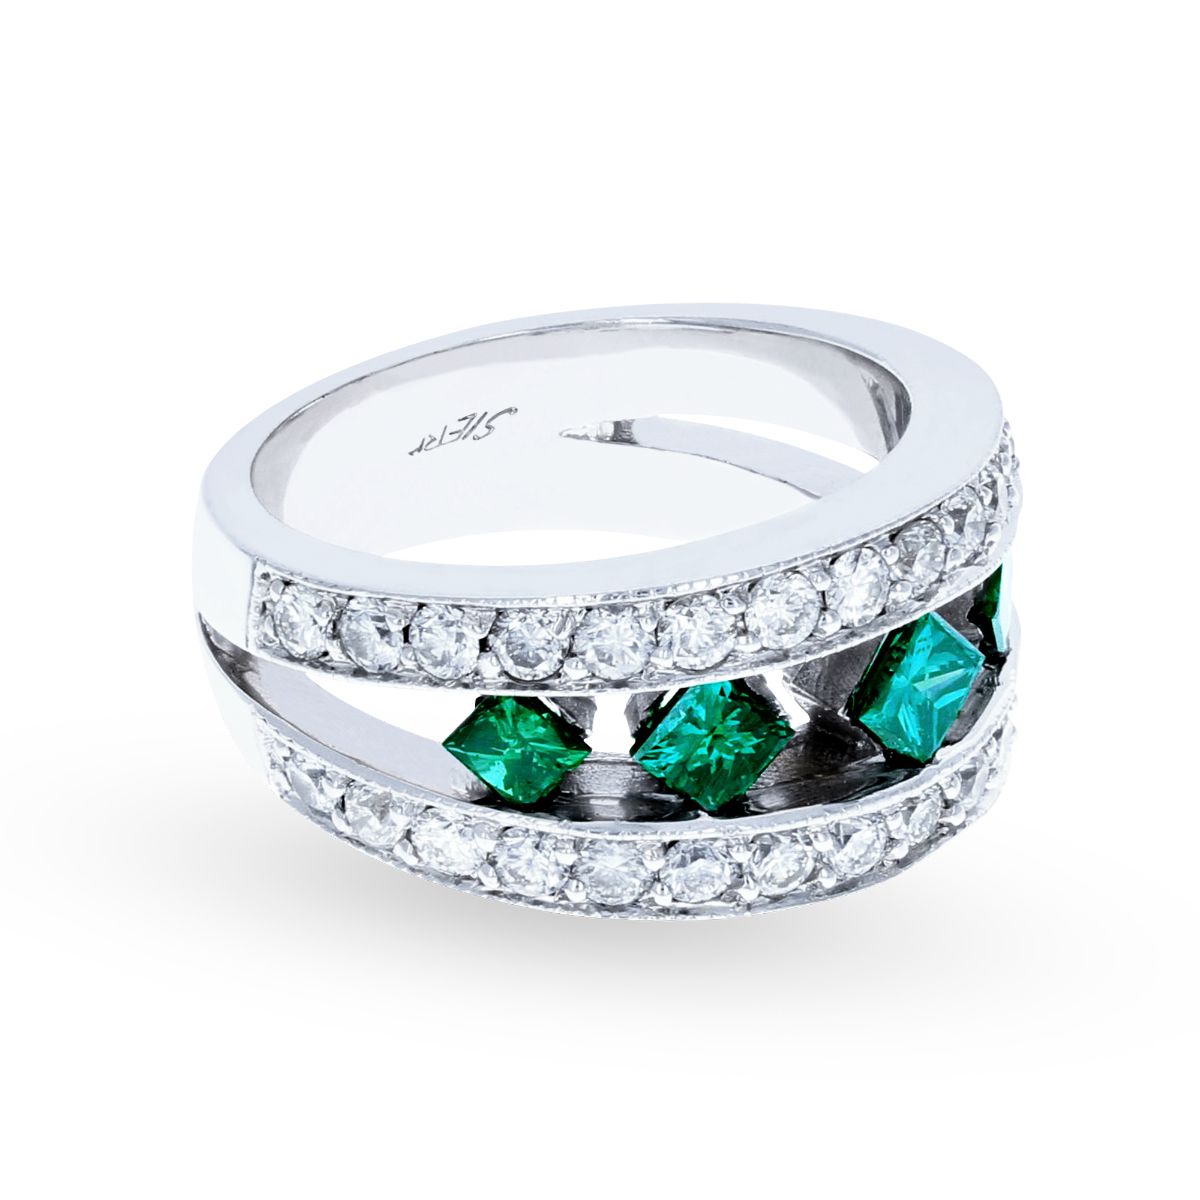 White Gold Teal and White Diamond Ring 14KT